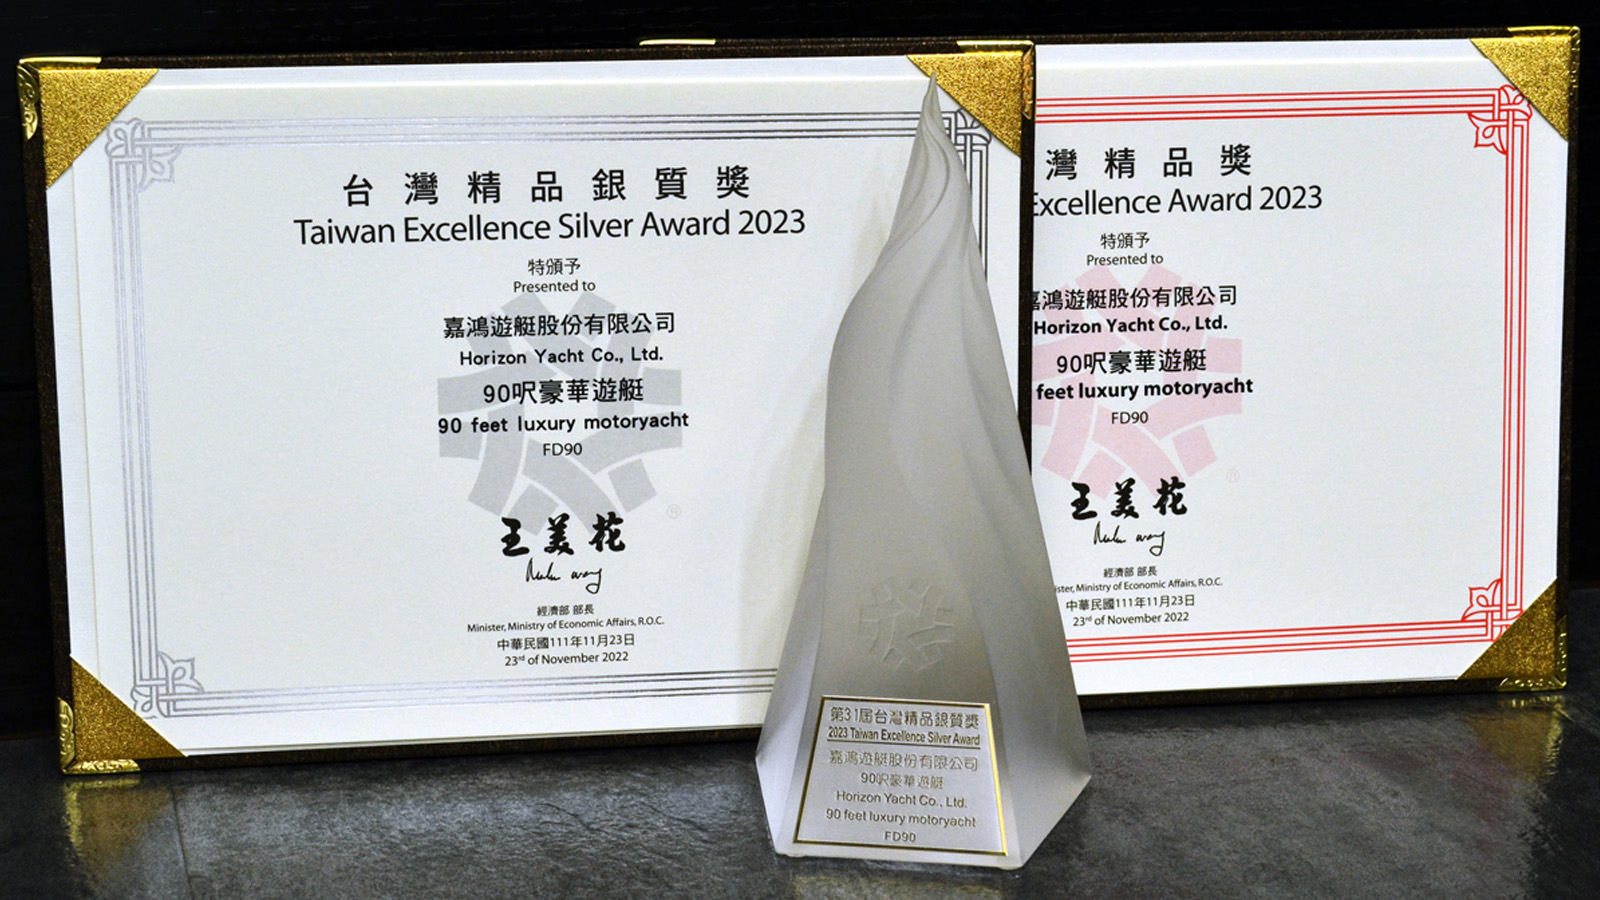 Taiwan Excellence Awards 2023